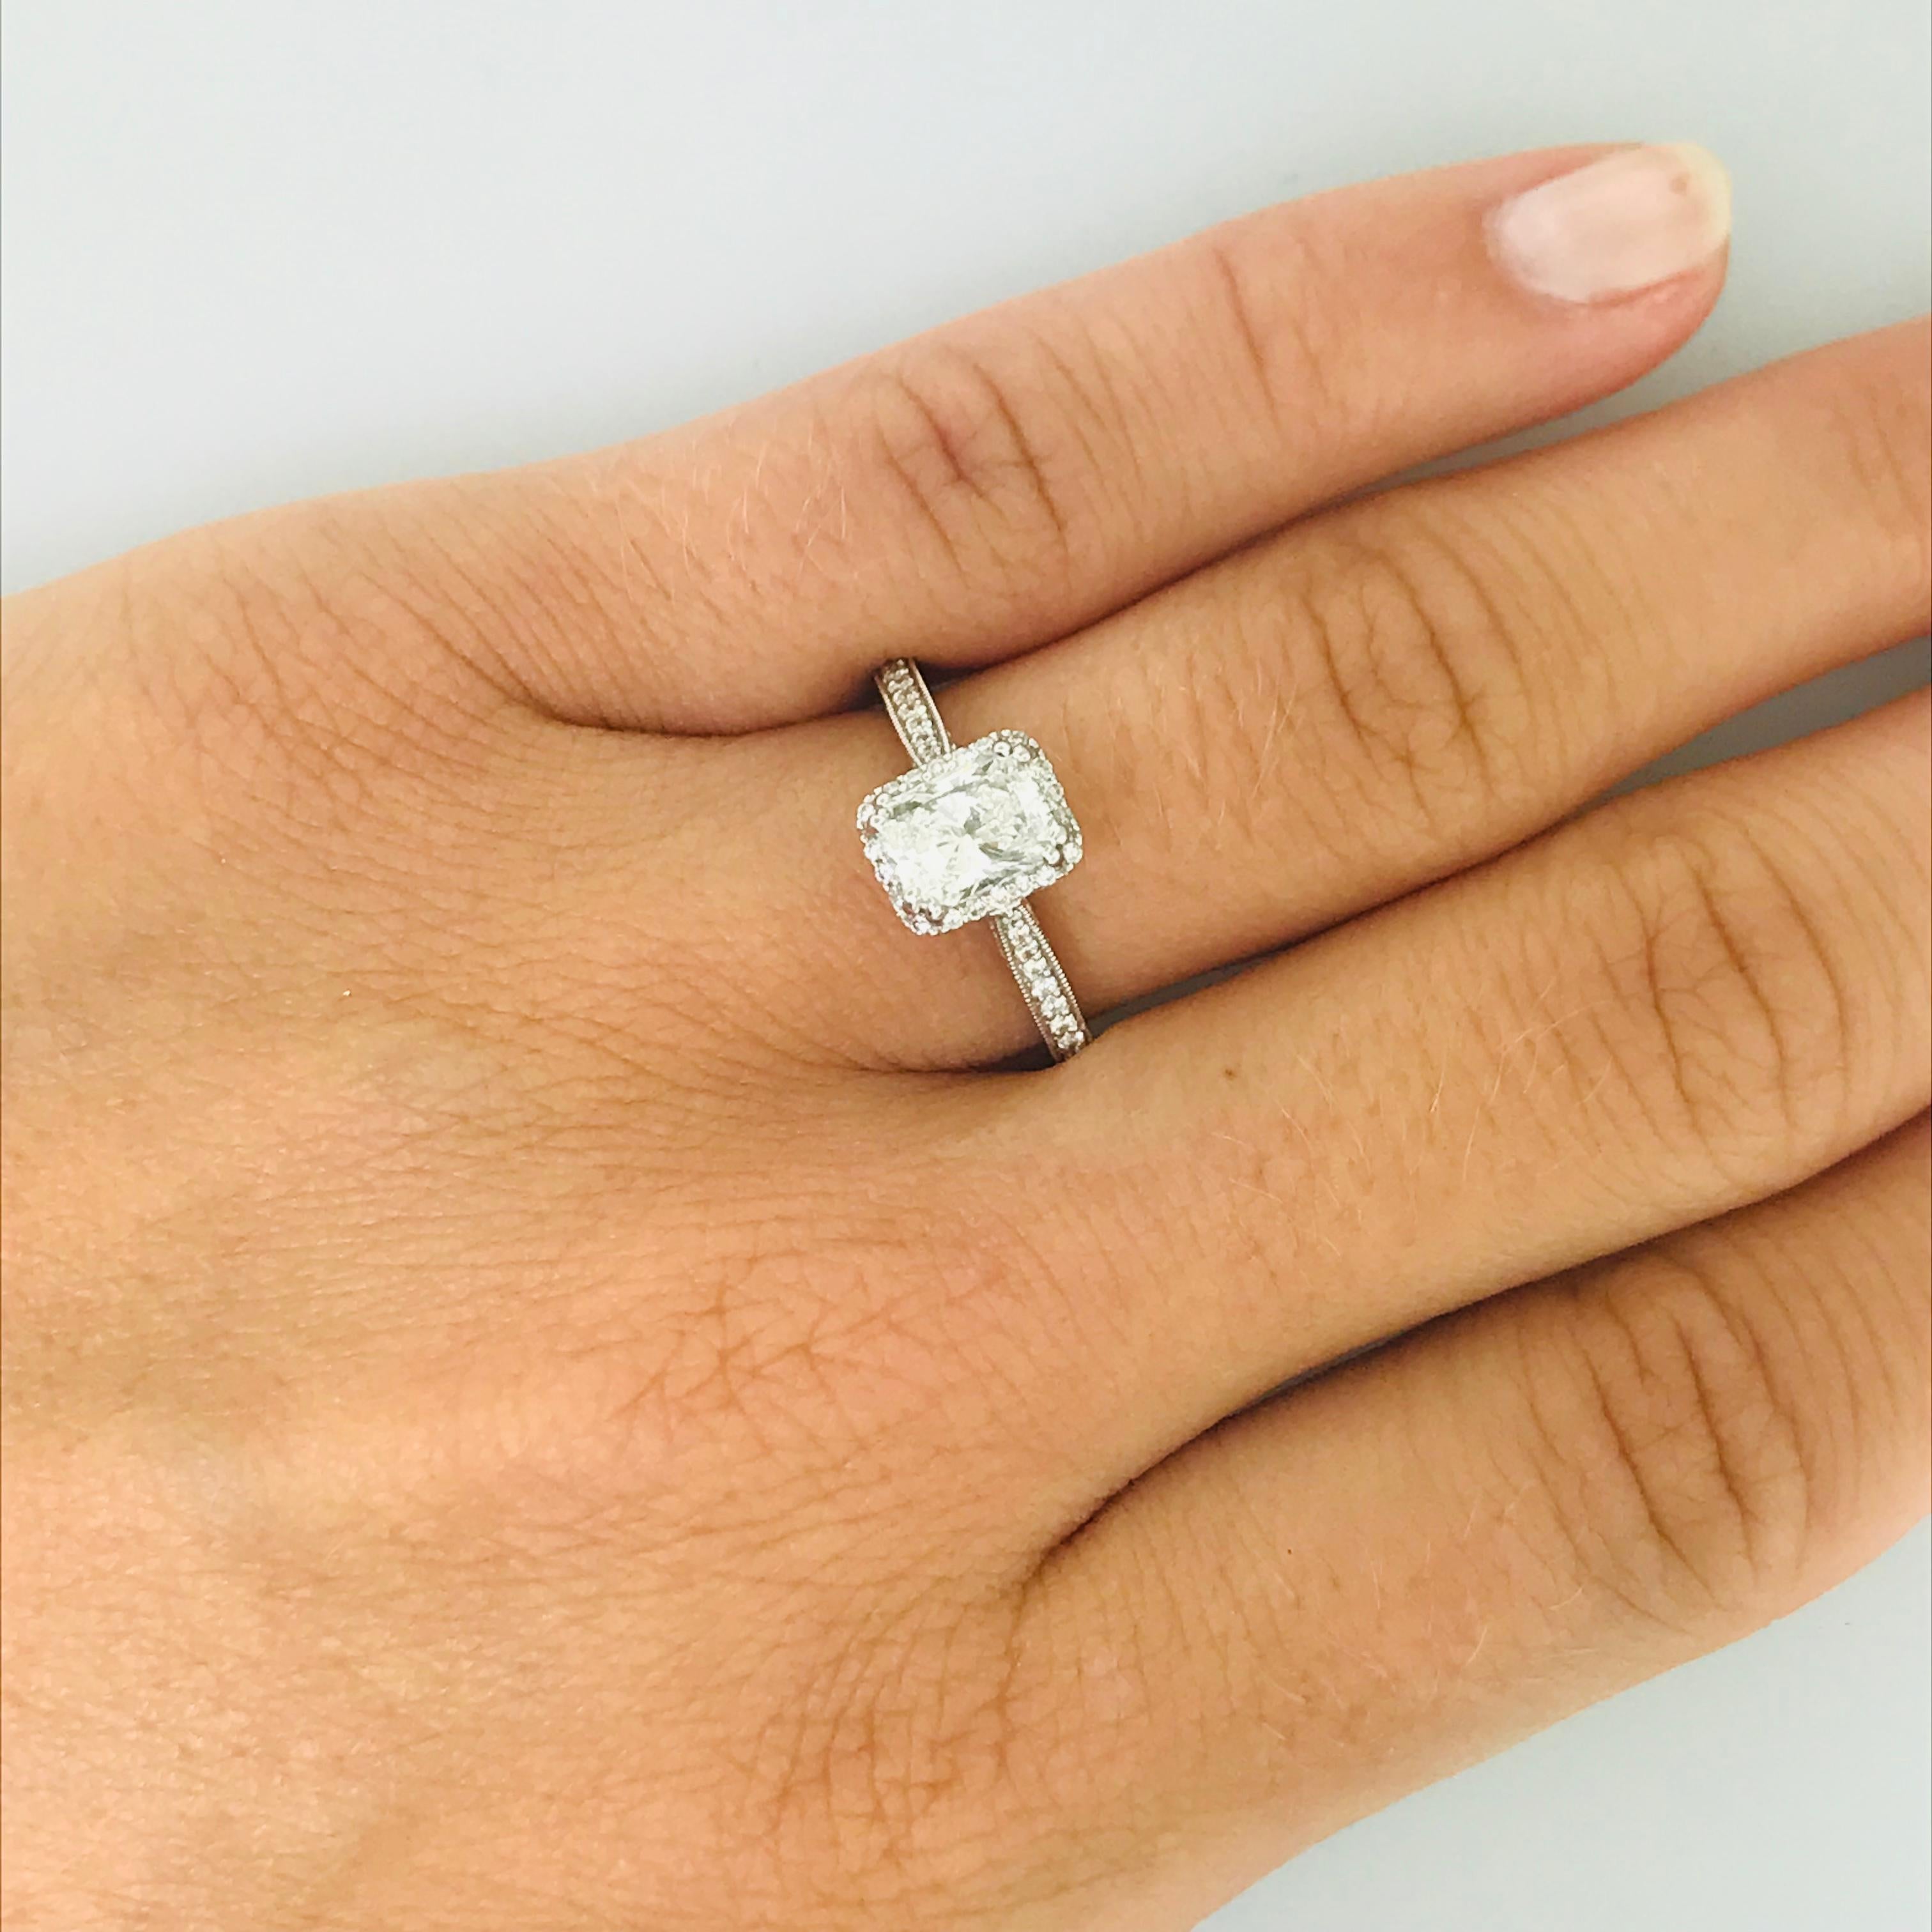 Everlasting Classic Radiant Diamond Engagement Ring

A RADIANT DIAMOND engagement ring for a radiant bride. This custom made ring was designed and created by Five Star Jewelry. With a radiant diamond set in 19 karat white gold this diamond shine